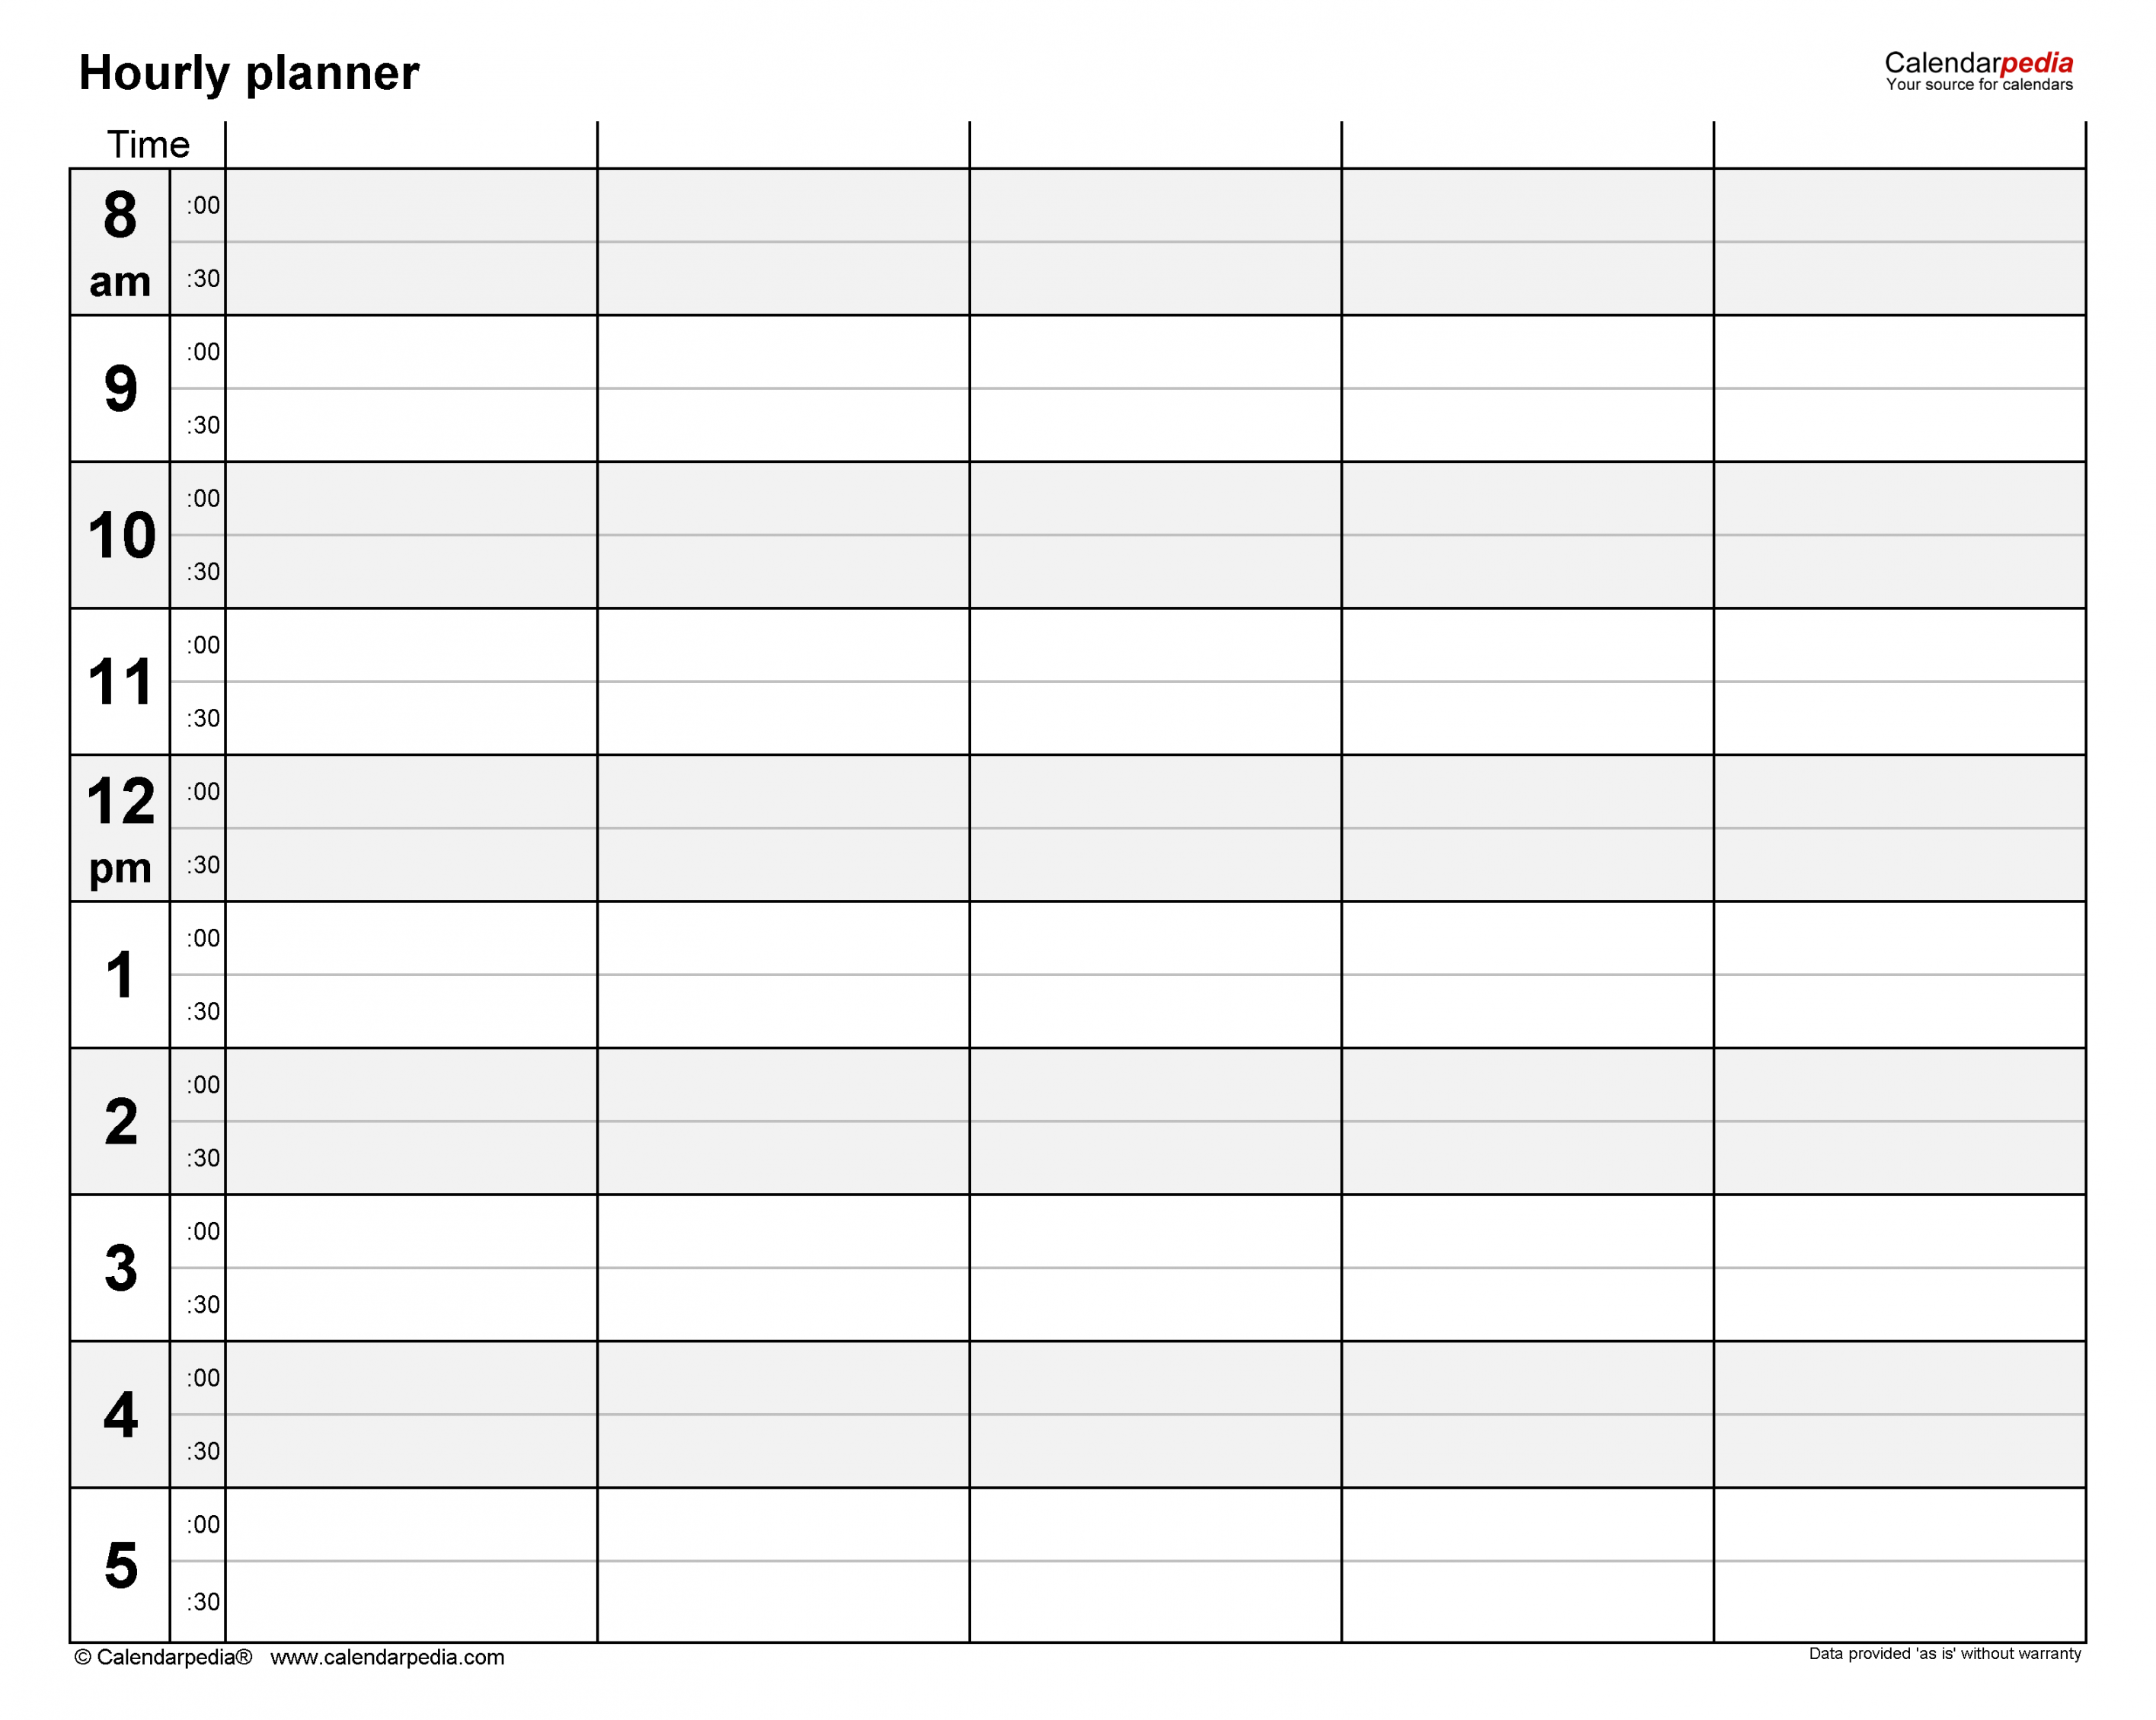 Free Hourly Planners in PDF Format - + Templates